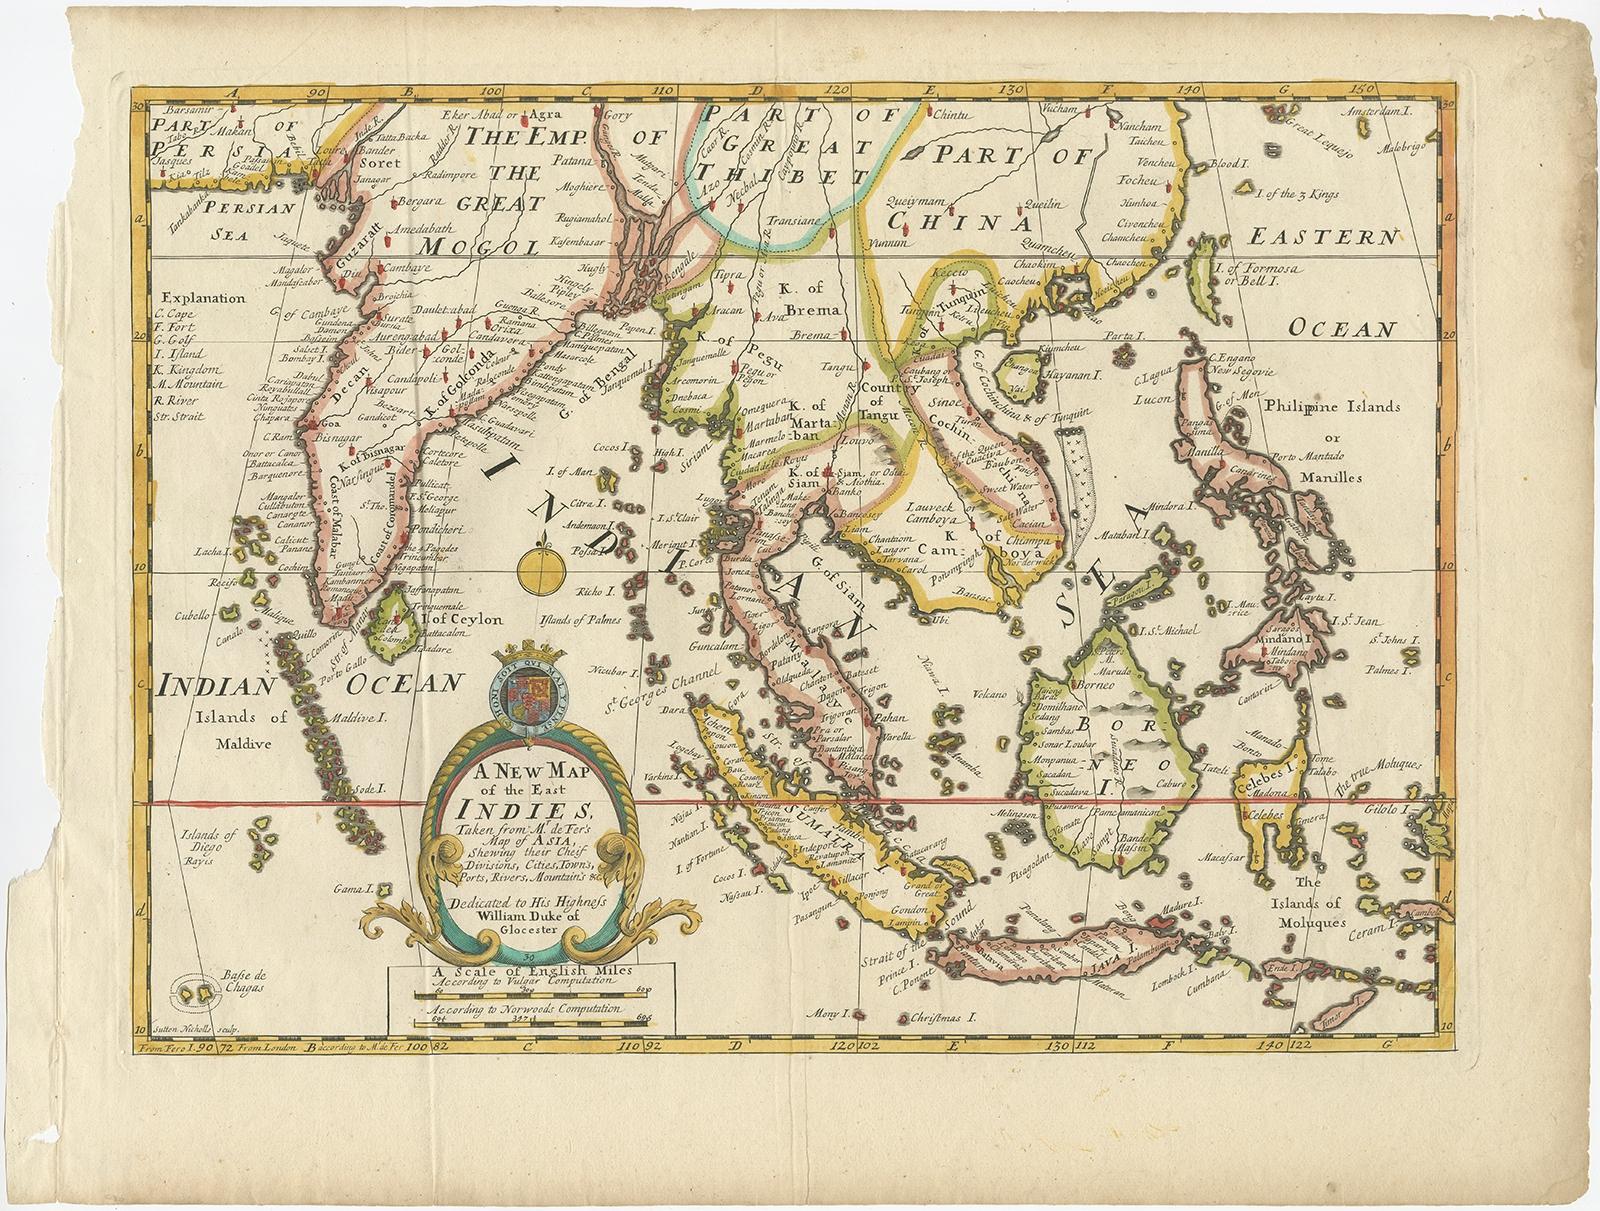 Description: Antique map titled 'A New Map of the East Indies'. Old map covering all of Southeast Asia from Persia to the Timor Island, inclusive of the modern day nations of India, Ceylon, Thailand, Burma (Myanmar), Malaysia, Cambodia, Vietnam,